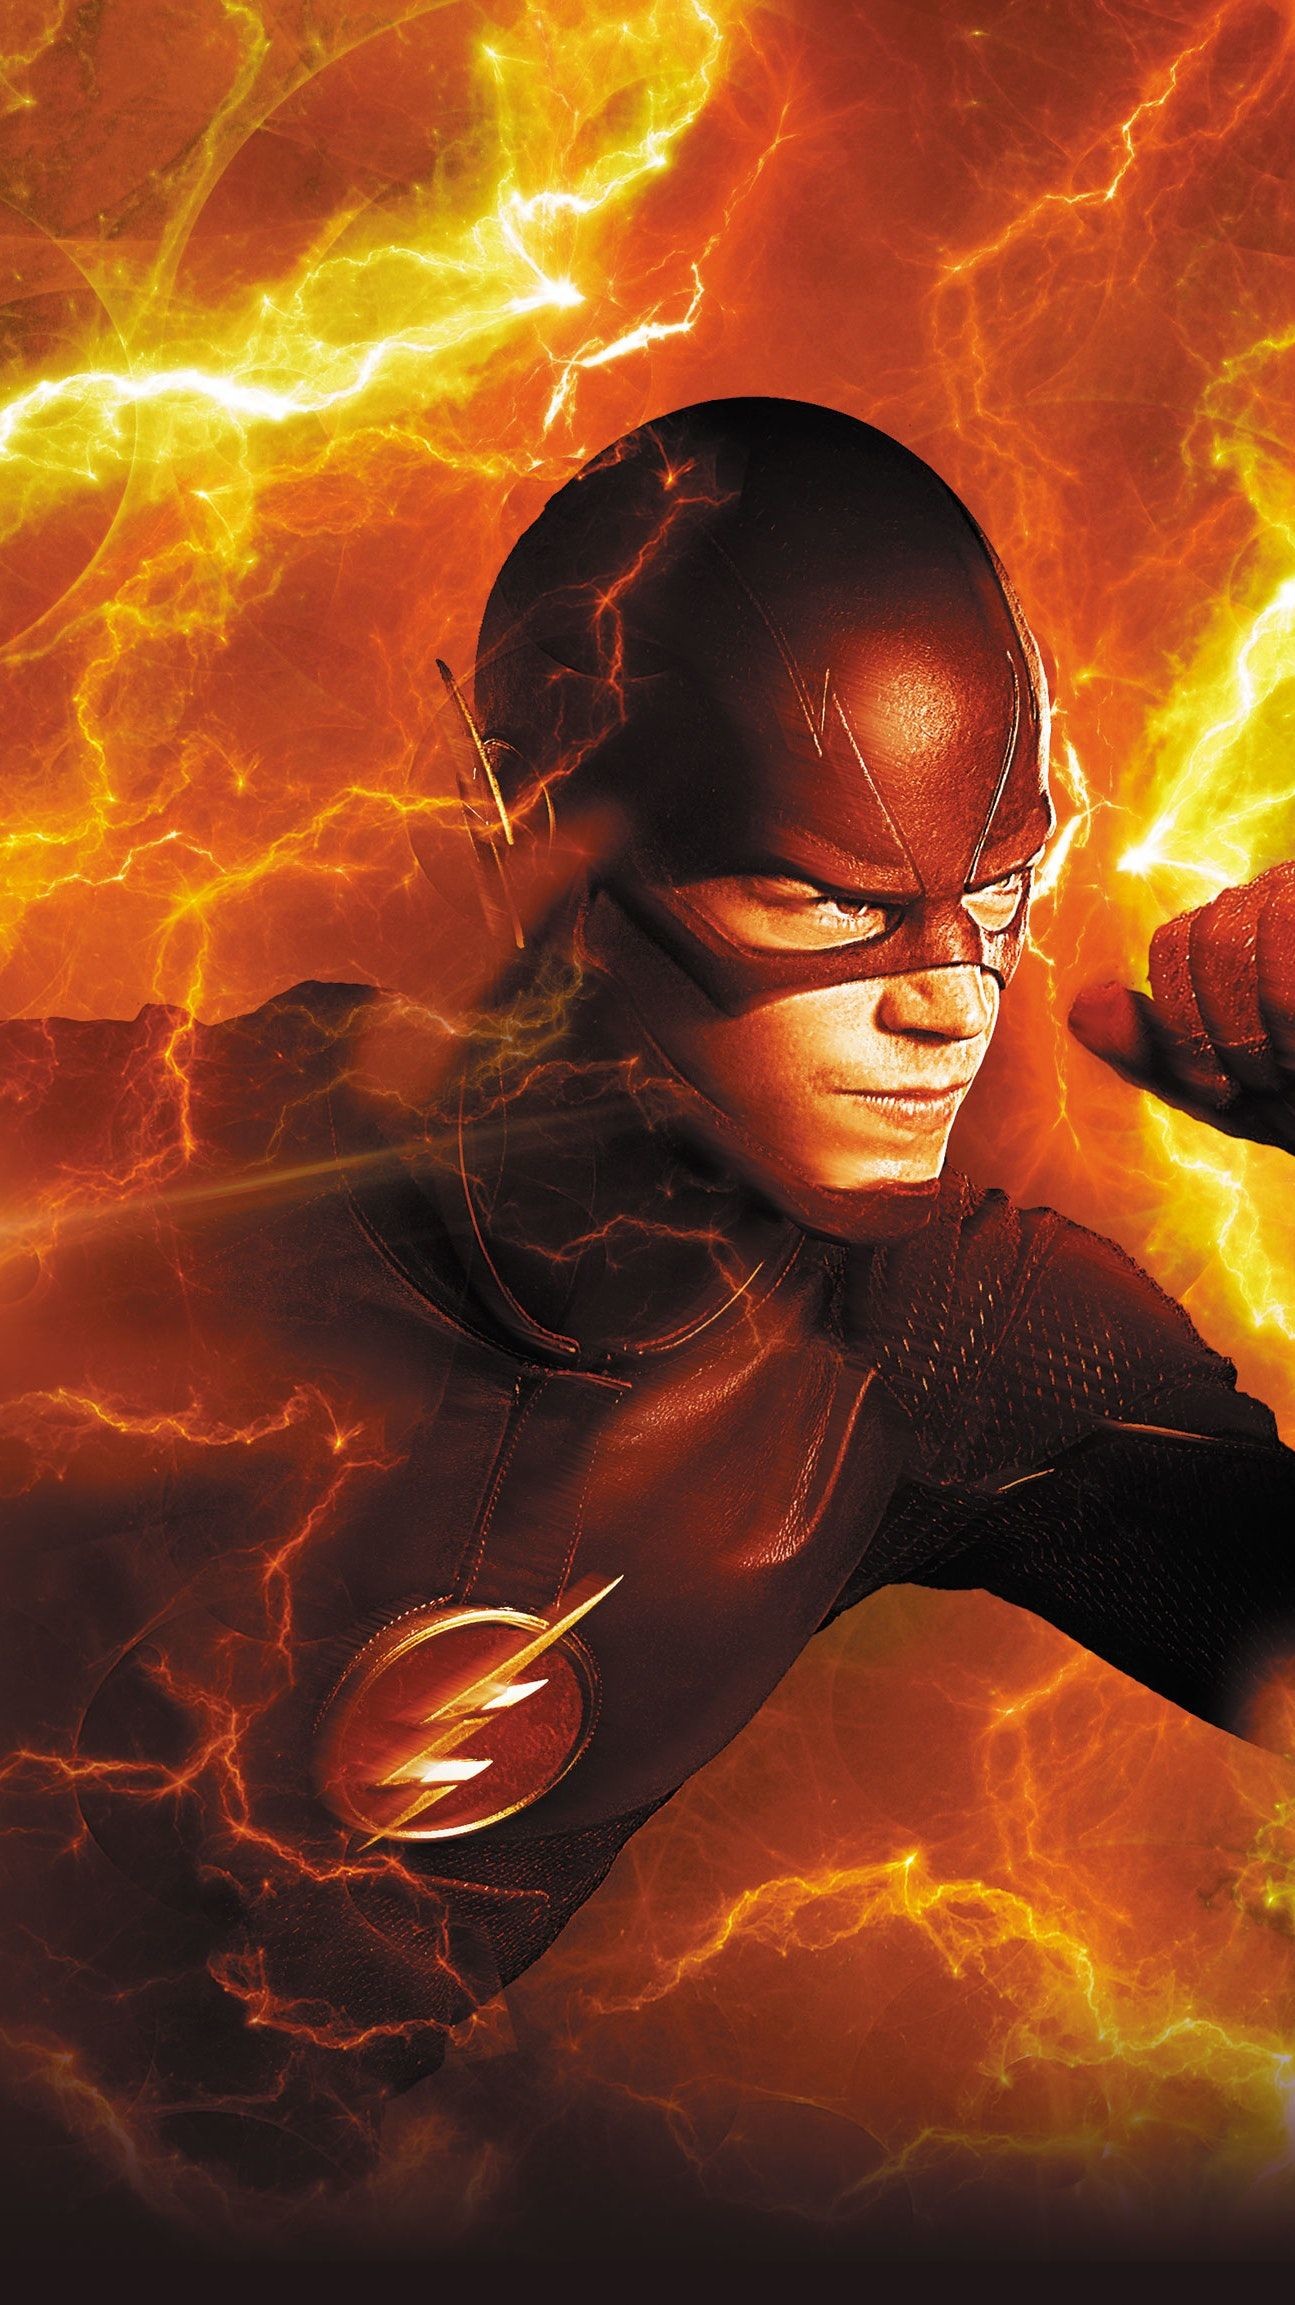 Barry Allen The Flash Wallpapers Wallpapers) Hd Wallpapers - Fun Facts The Flash - HD Wallpaper 